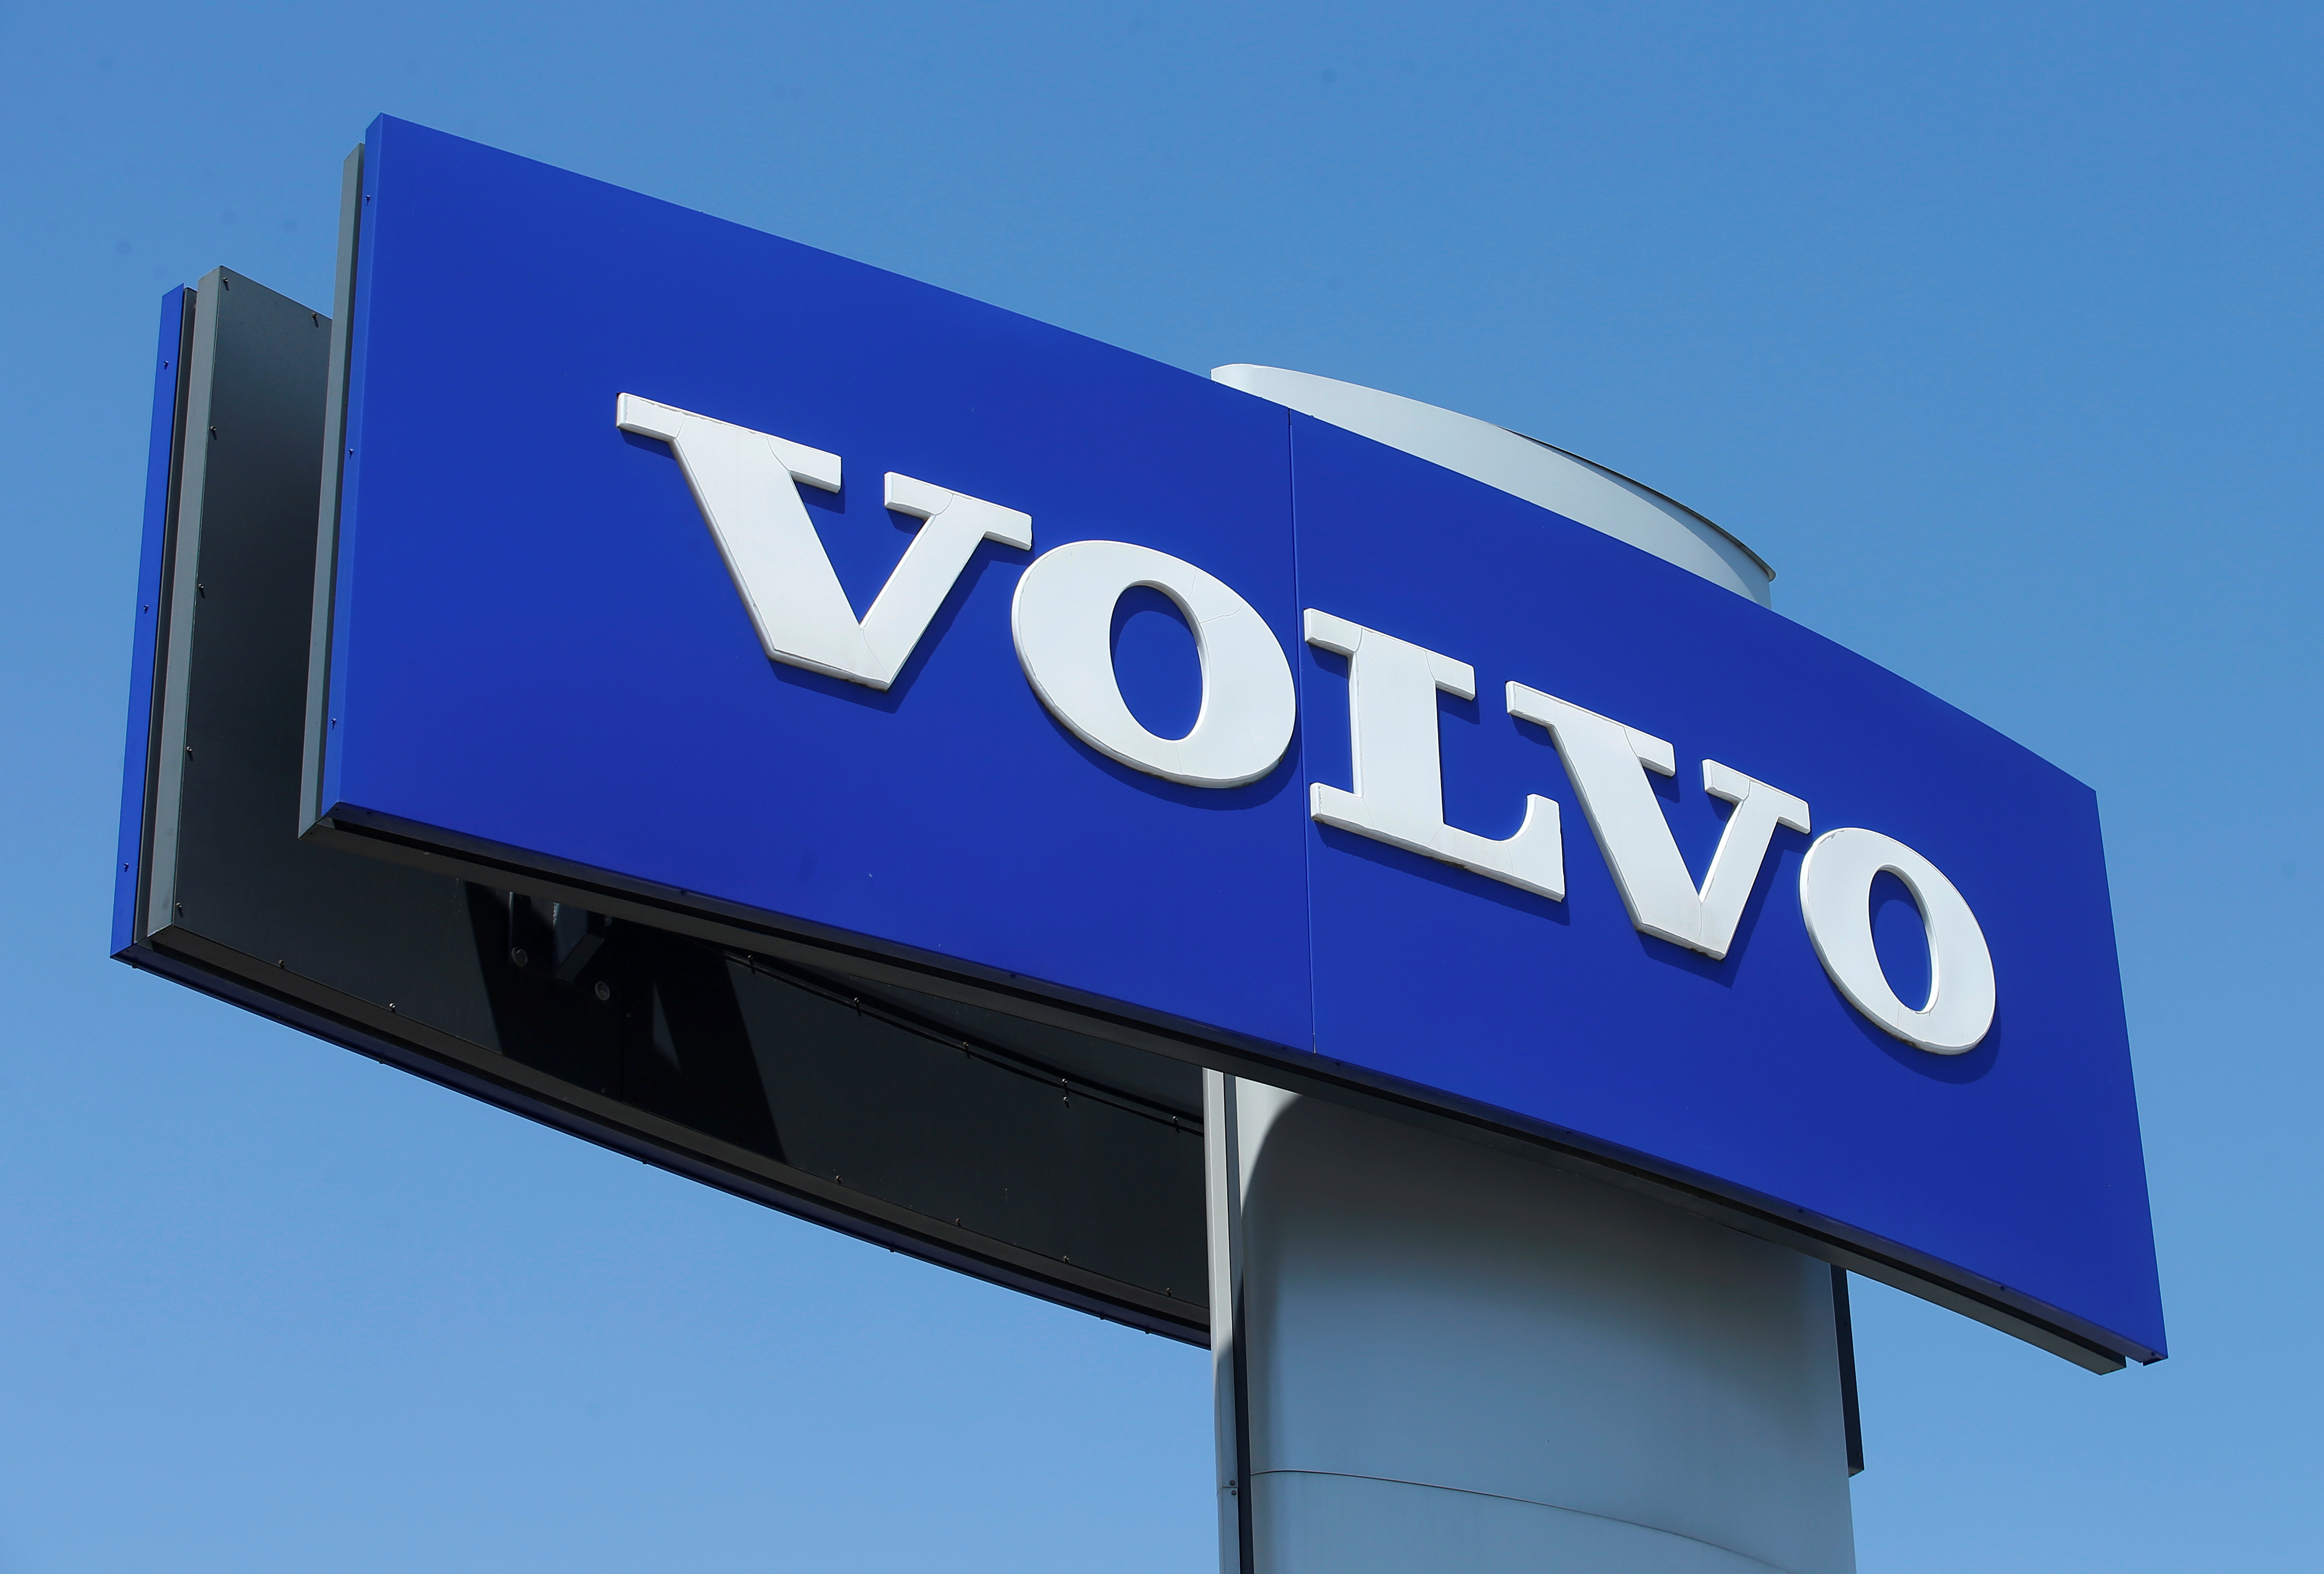 A Volvo logo is seen at a car dealership in Vienna